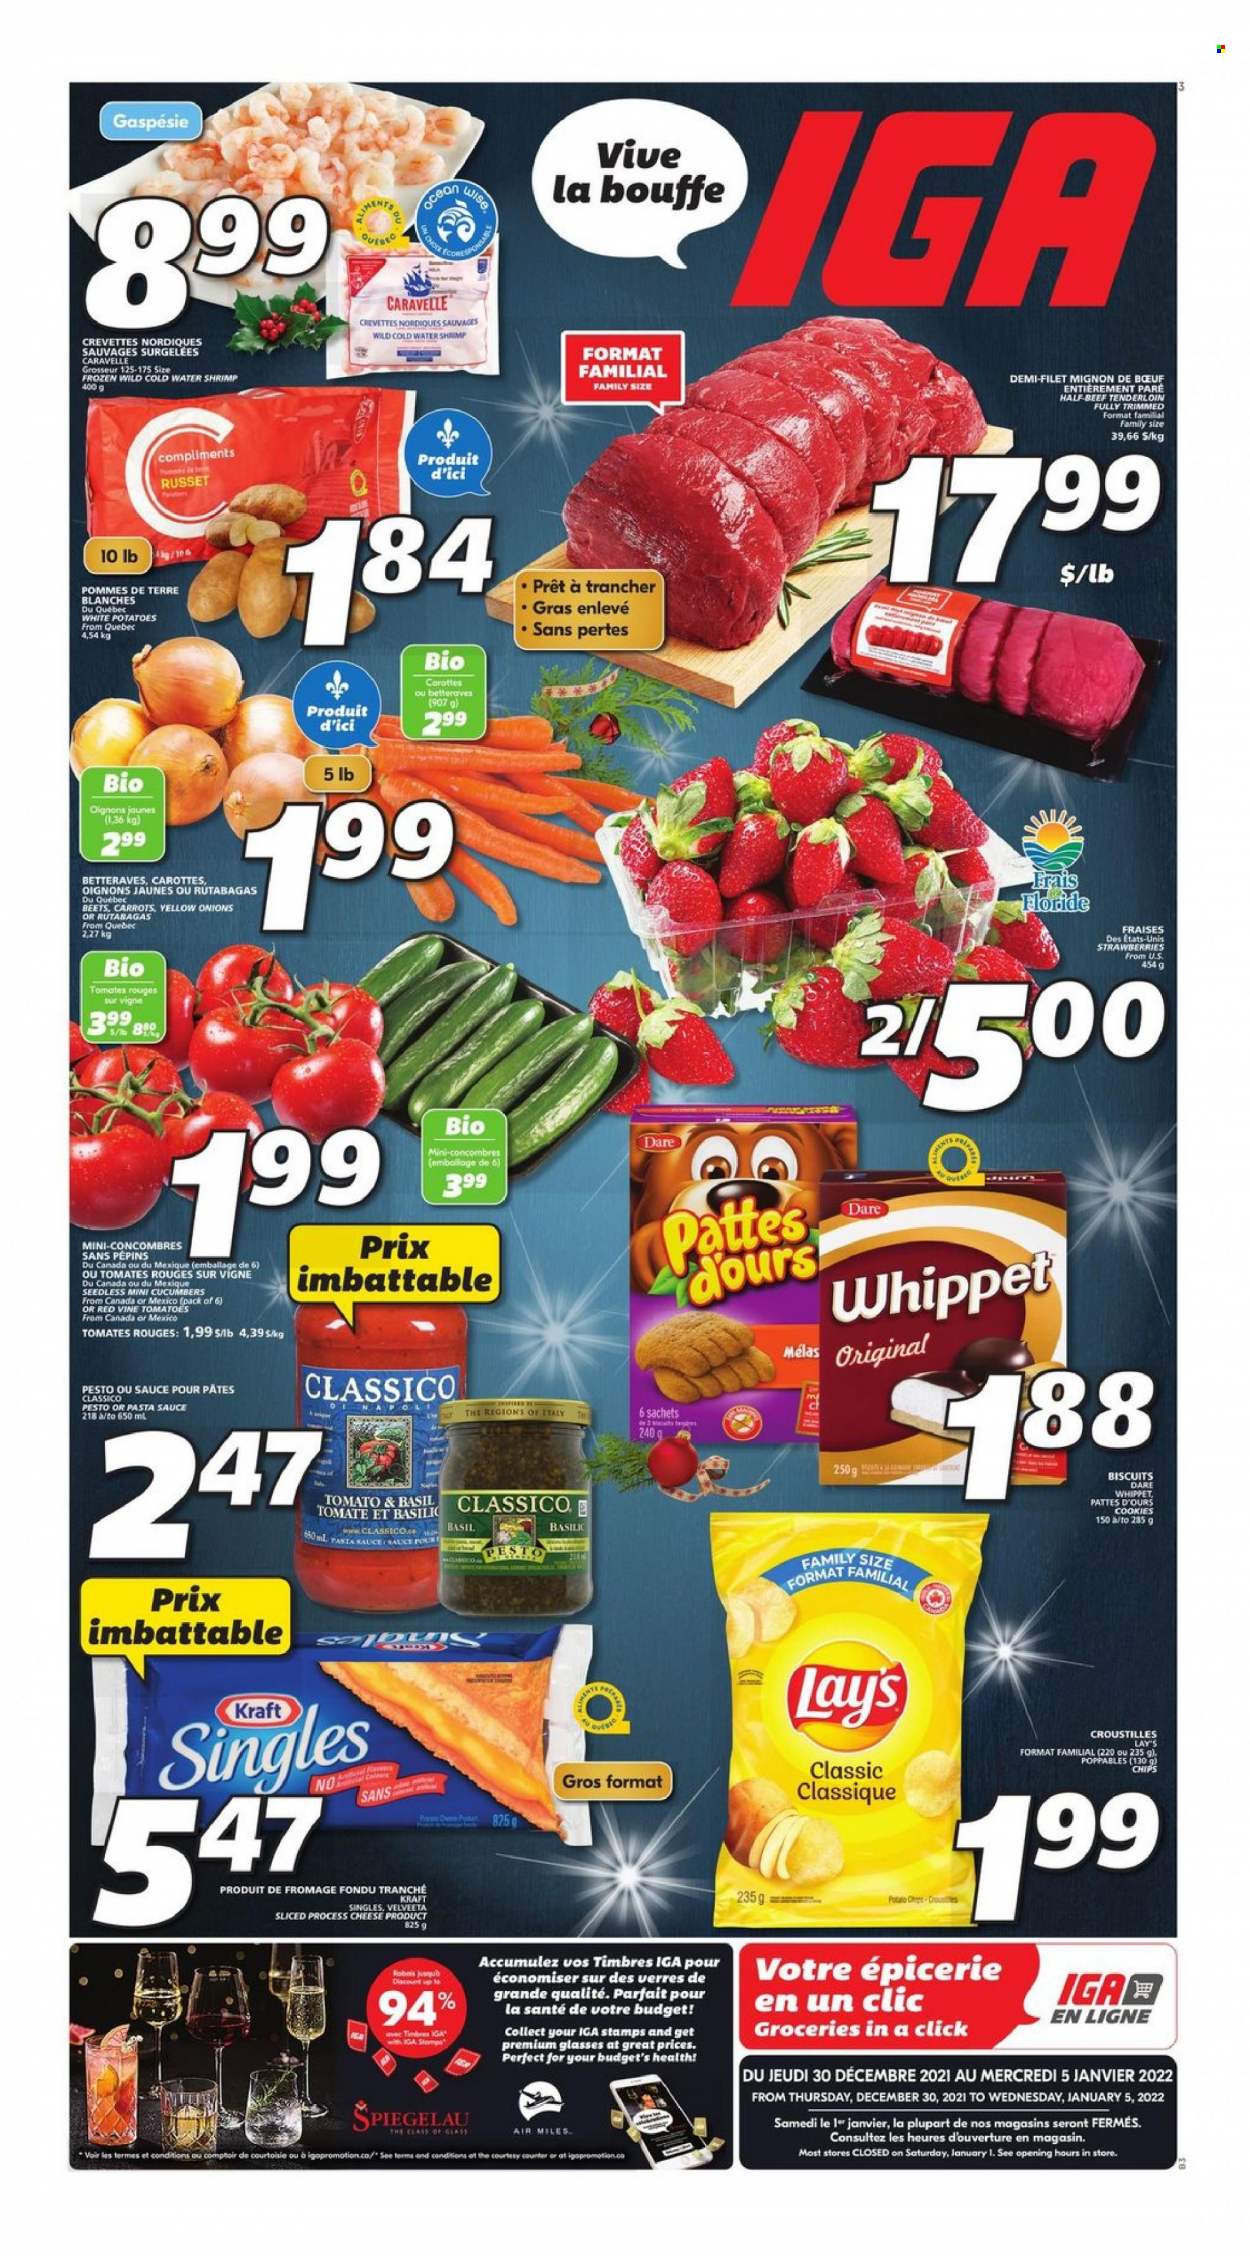 thumbnail - IGA Flyer - December 30, 2021 - January 05, 2022 - Sales products - cucumber, russet potatoes, potatoes, onion, strawberries, shrimps, pasta sauce, sauce, Kraft®, sandwich slices, cheese, Kraft Singles, cookies, biscuit, Lay’s, Classico, beef meat, beef tenderloin, pesto. Page 1.